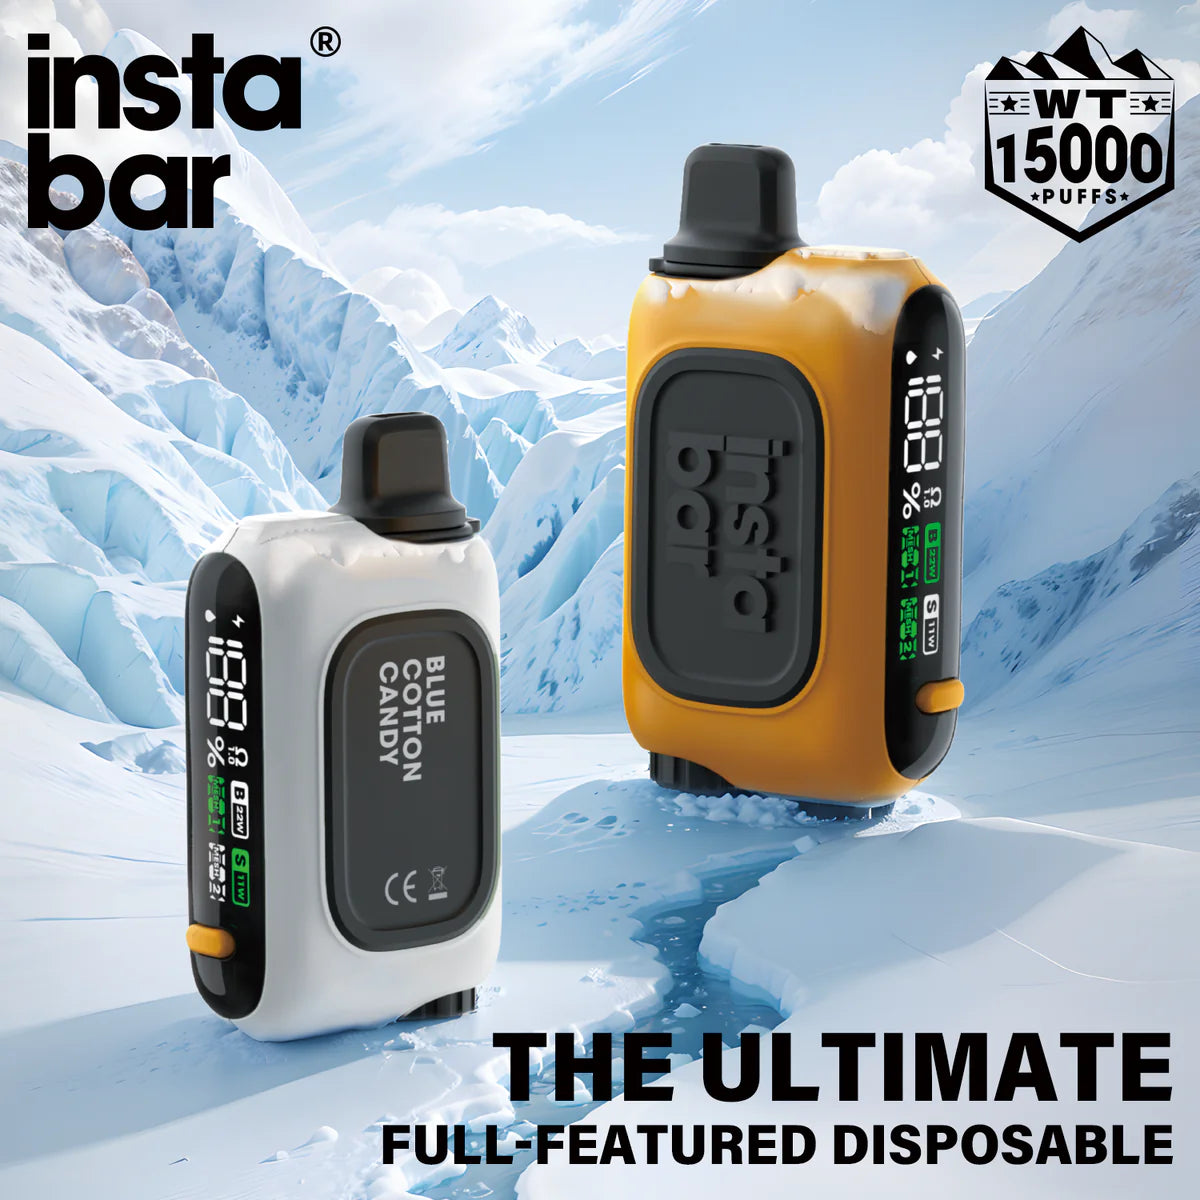 InstaBar WT15000 Rechargeable Disposable Device – 15000 Puffs [BUY 5 BOXES GET 1 FREE]